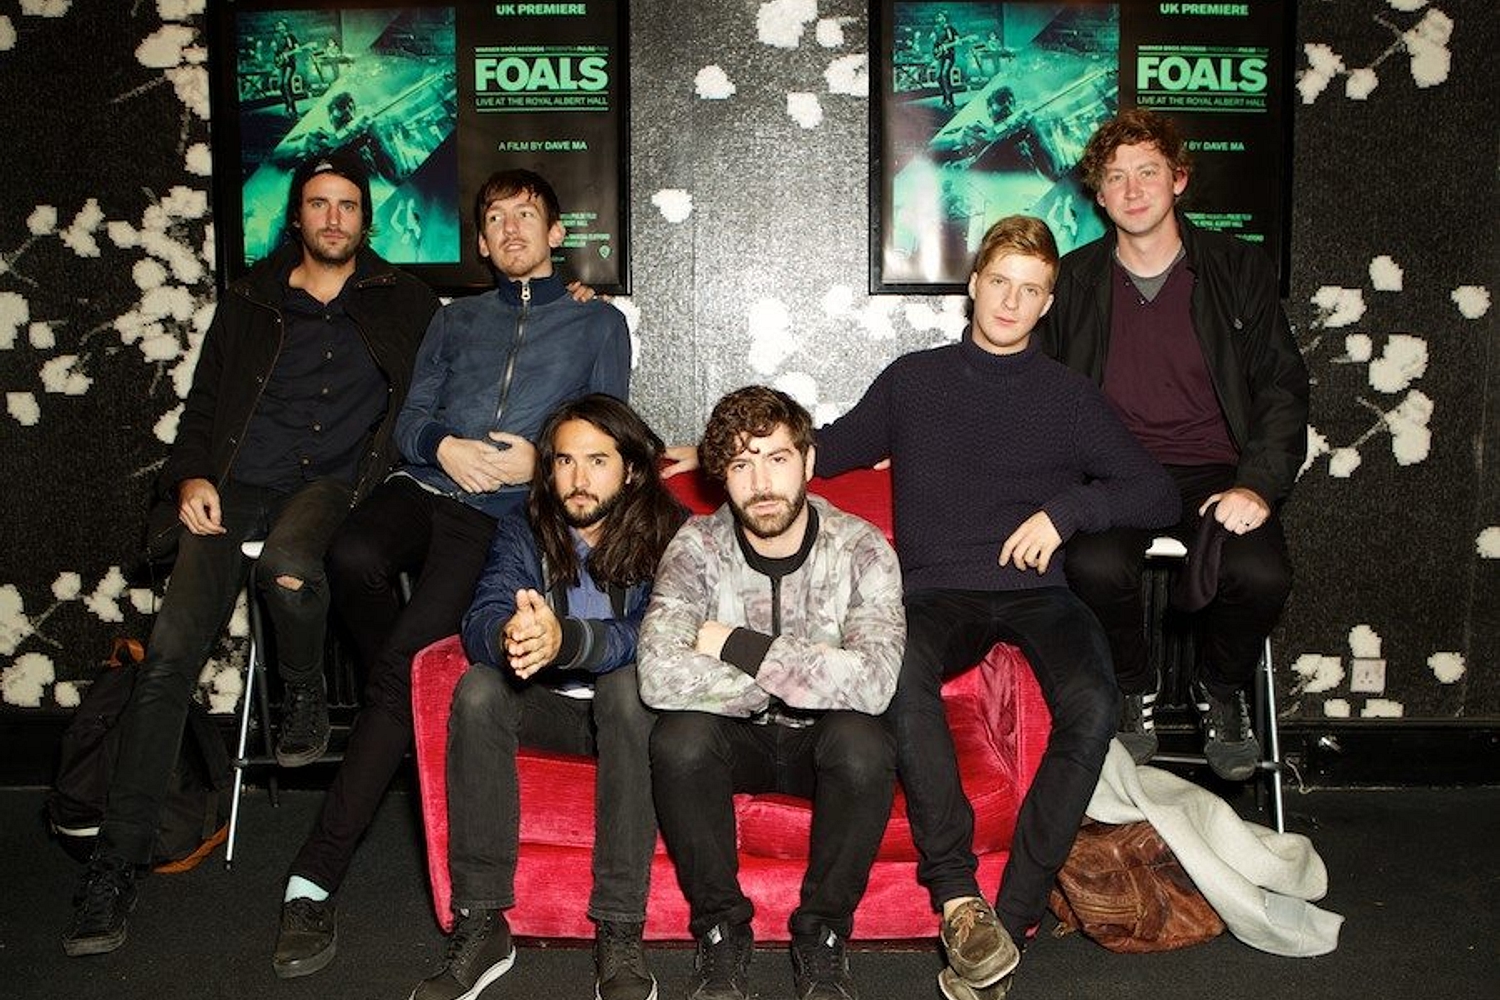 Dave Ma, on bringing the visuals to Foals’ ‘Antidotes’​